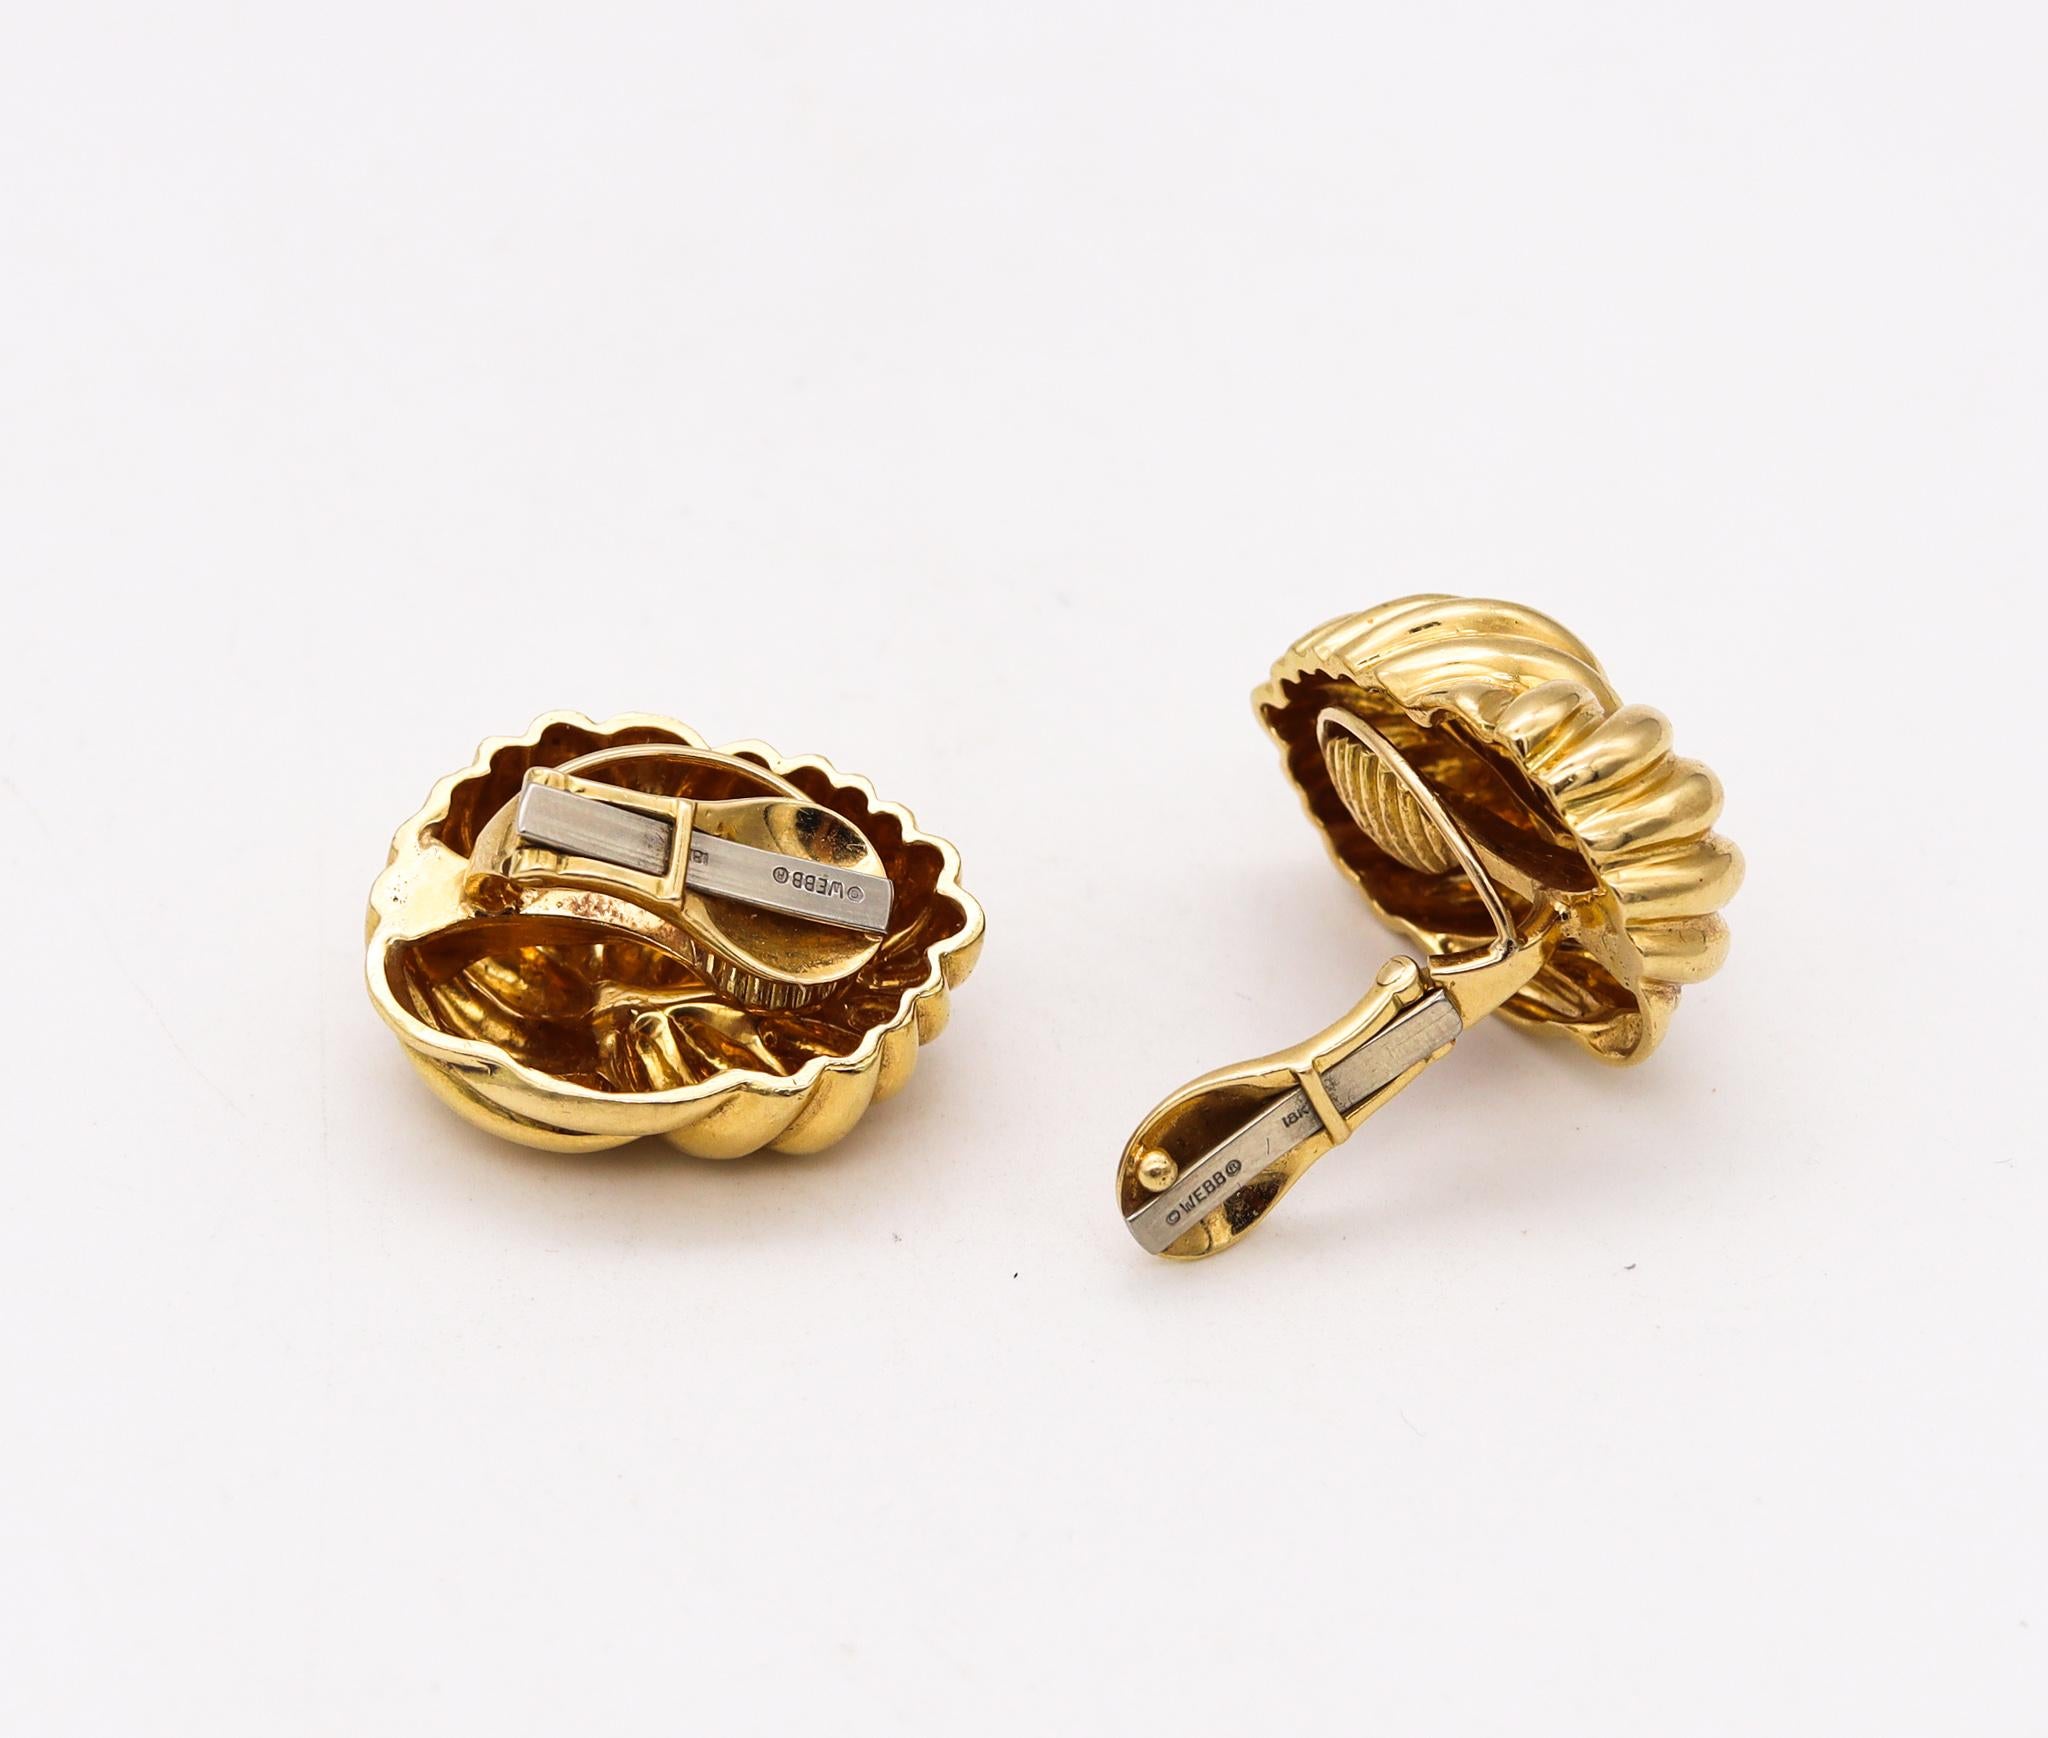 David Webb Textured Knots Clip-On Earrings in Textured Solid 18Kt Yellow Gold In Excellent Condition For Sale In Miami, FL